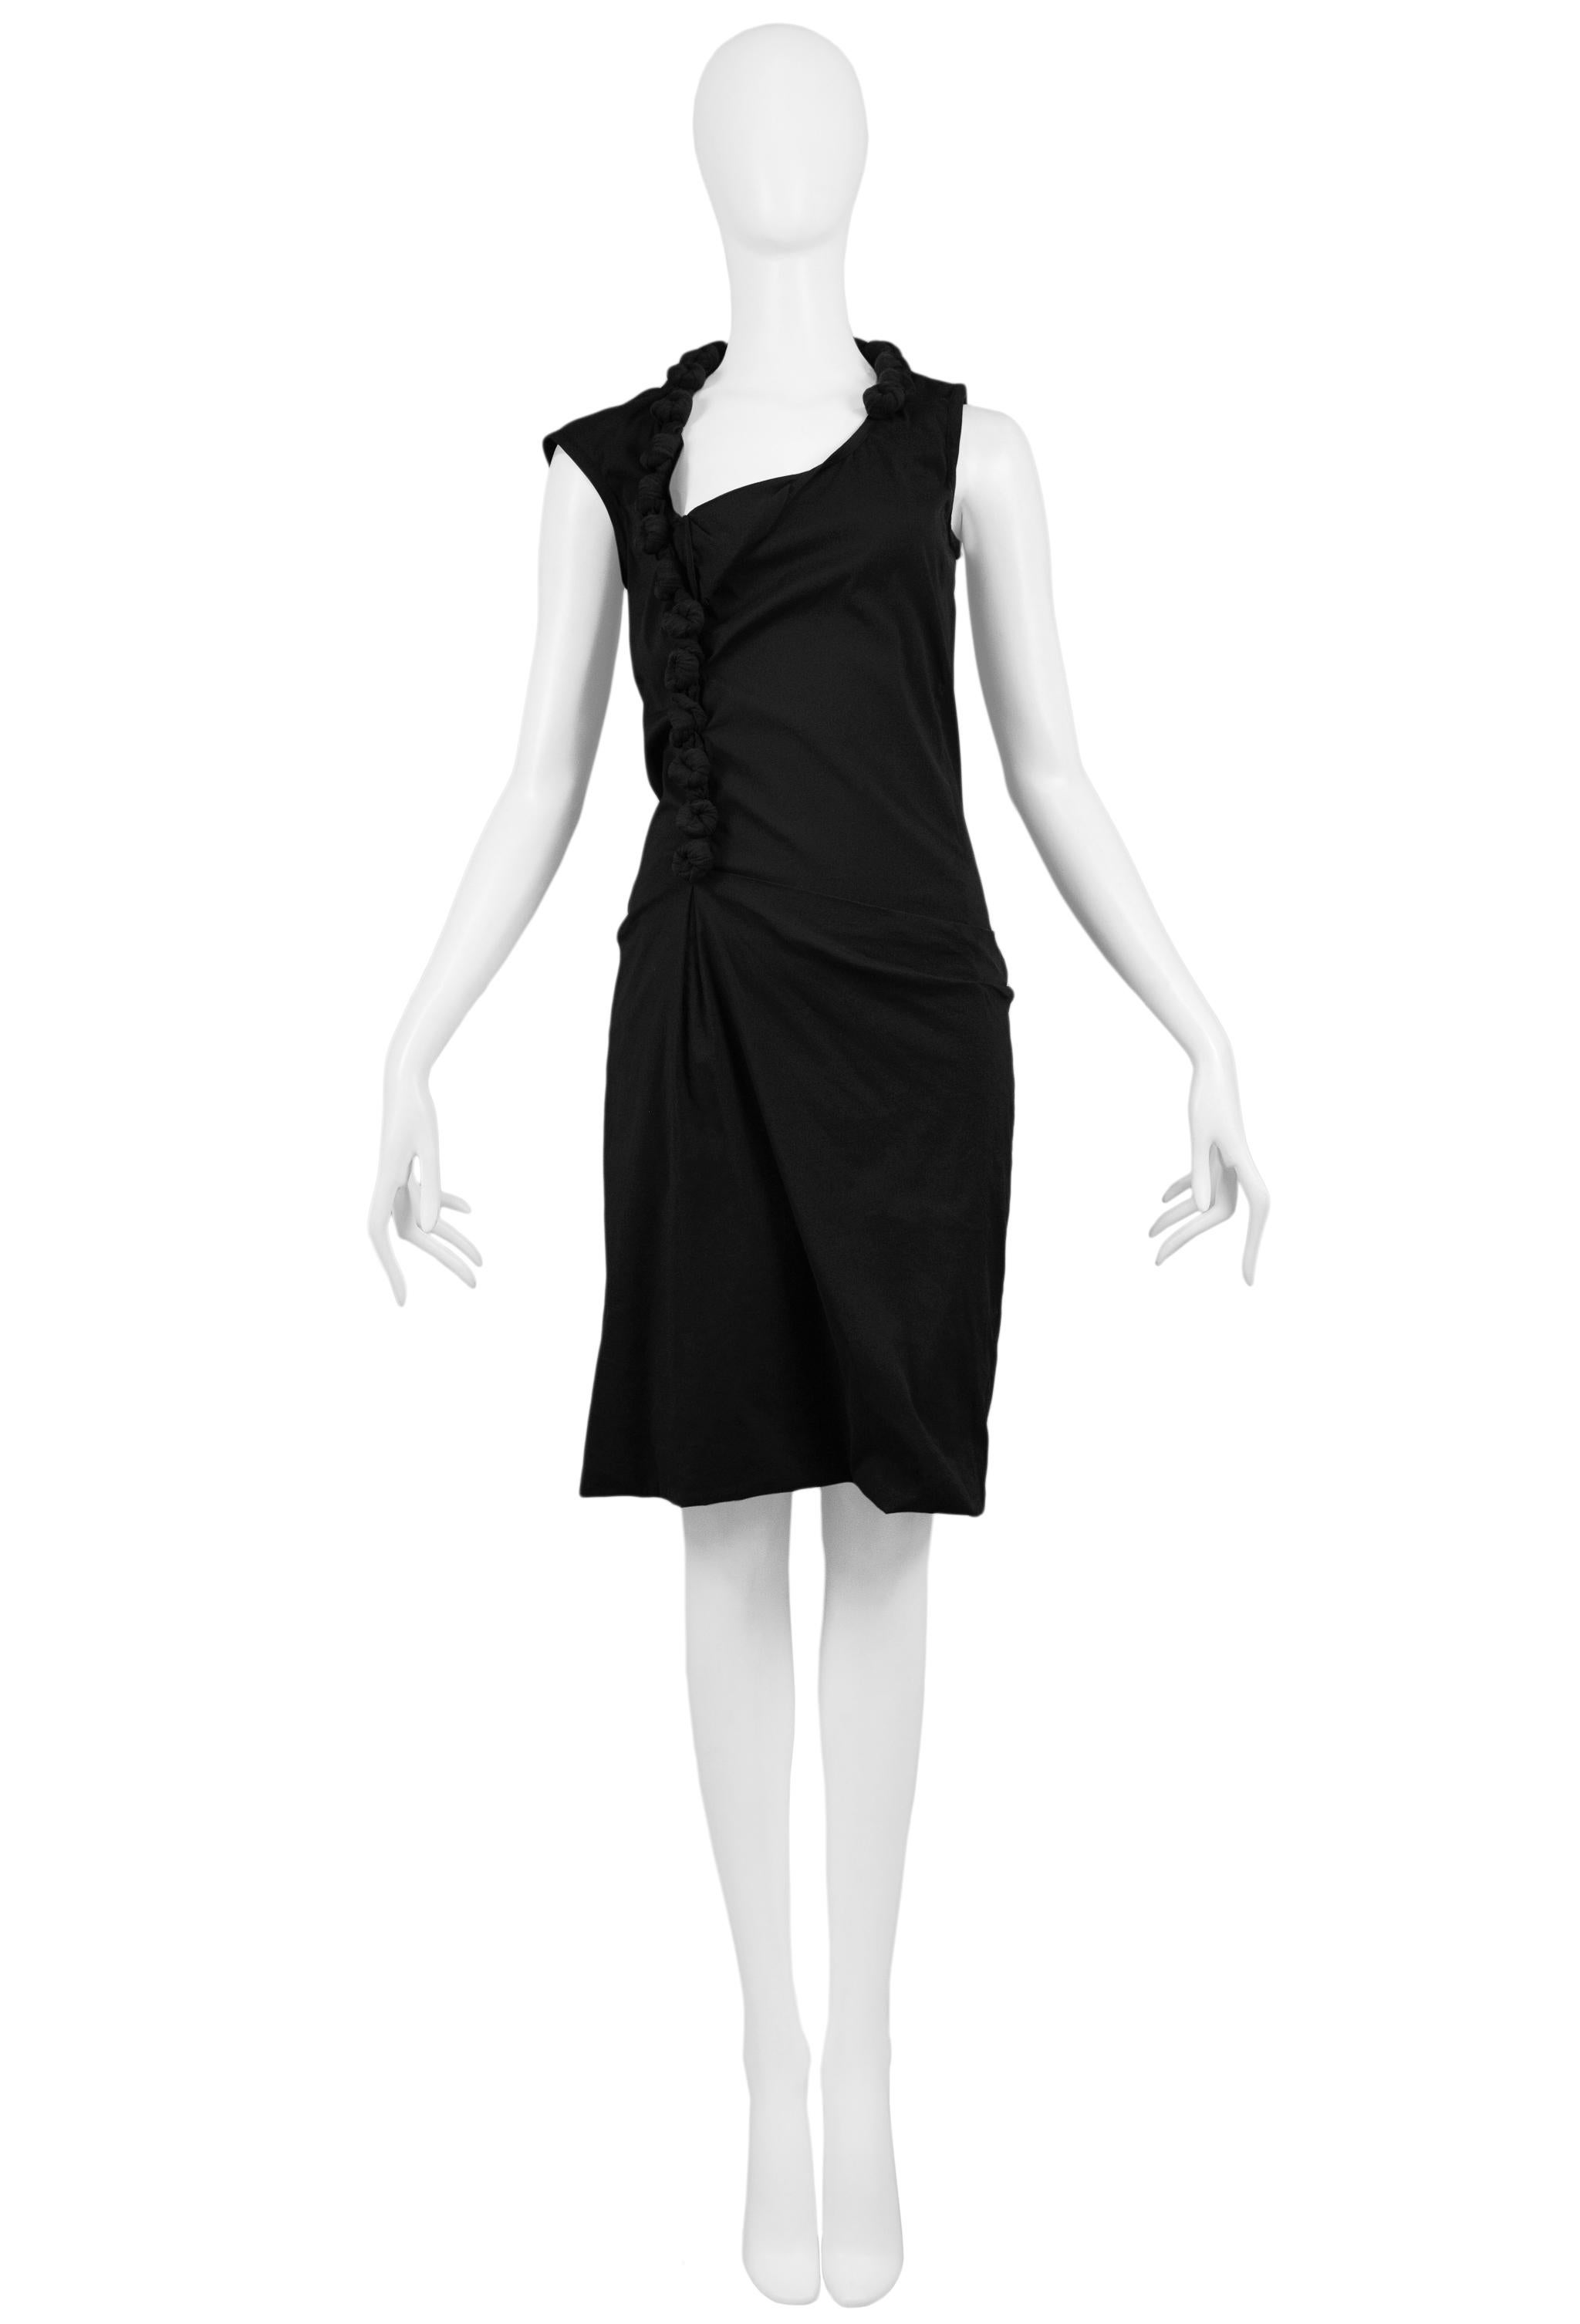 Helmut Lang Black Knot Dress 2005 In Excellent Condition For Sale In Los Angeles, CA